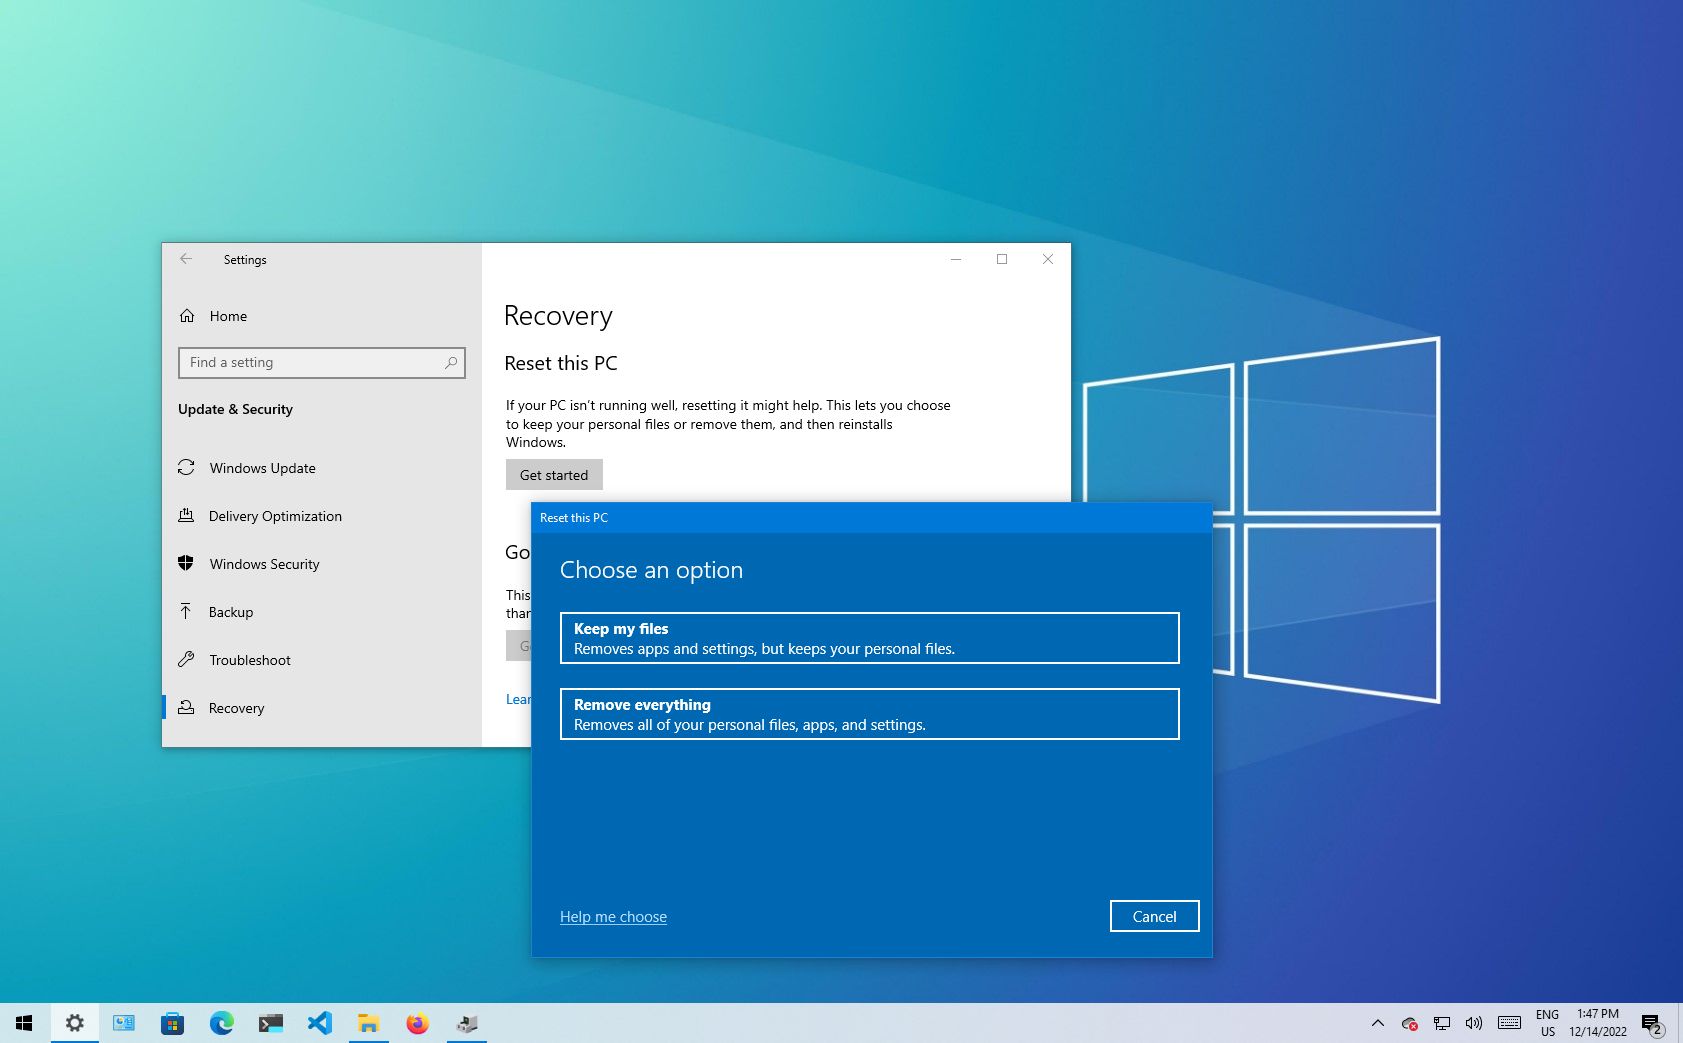 Step-by-Step Guide on How to Factory Reset Windows 10 - Reinstalling necessary applications and configuring settings